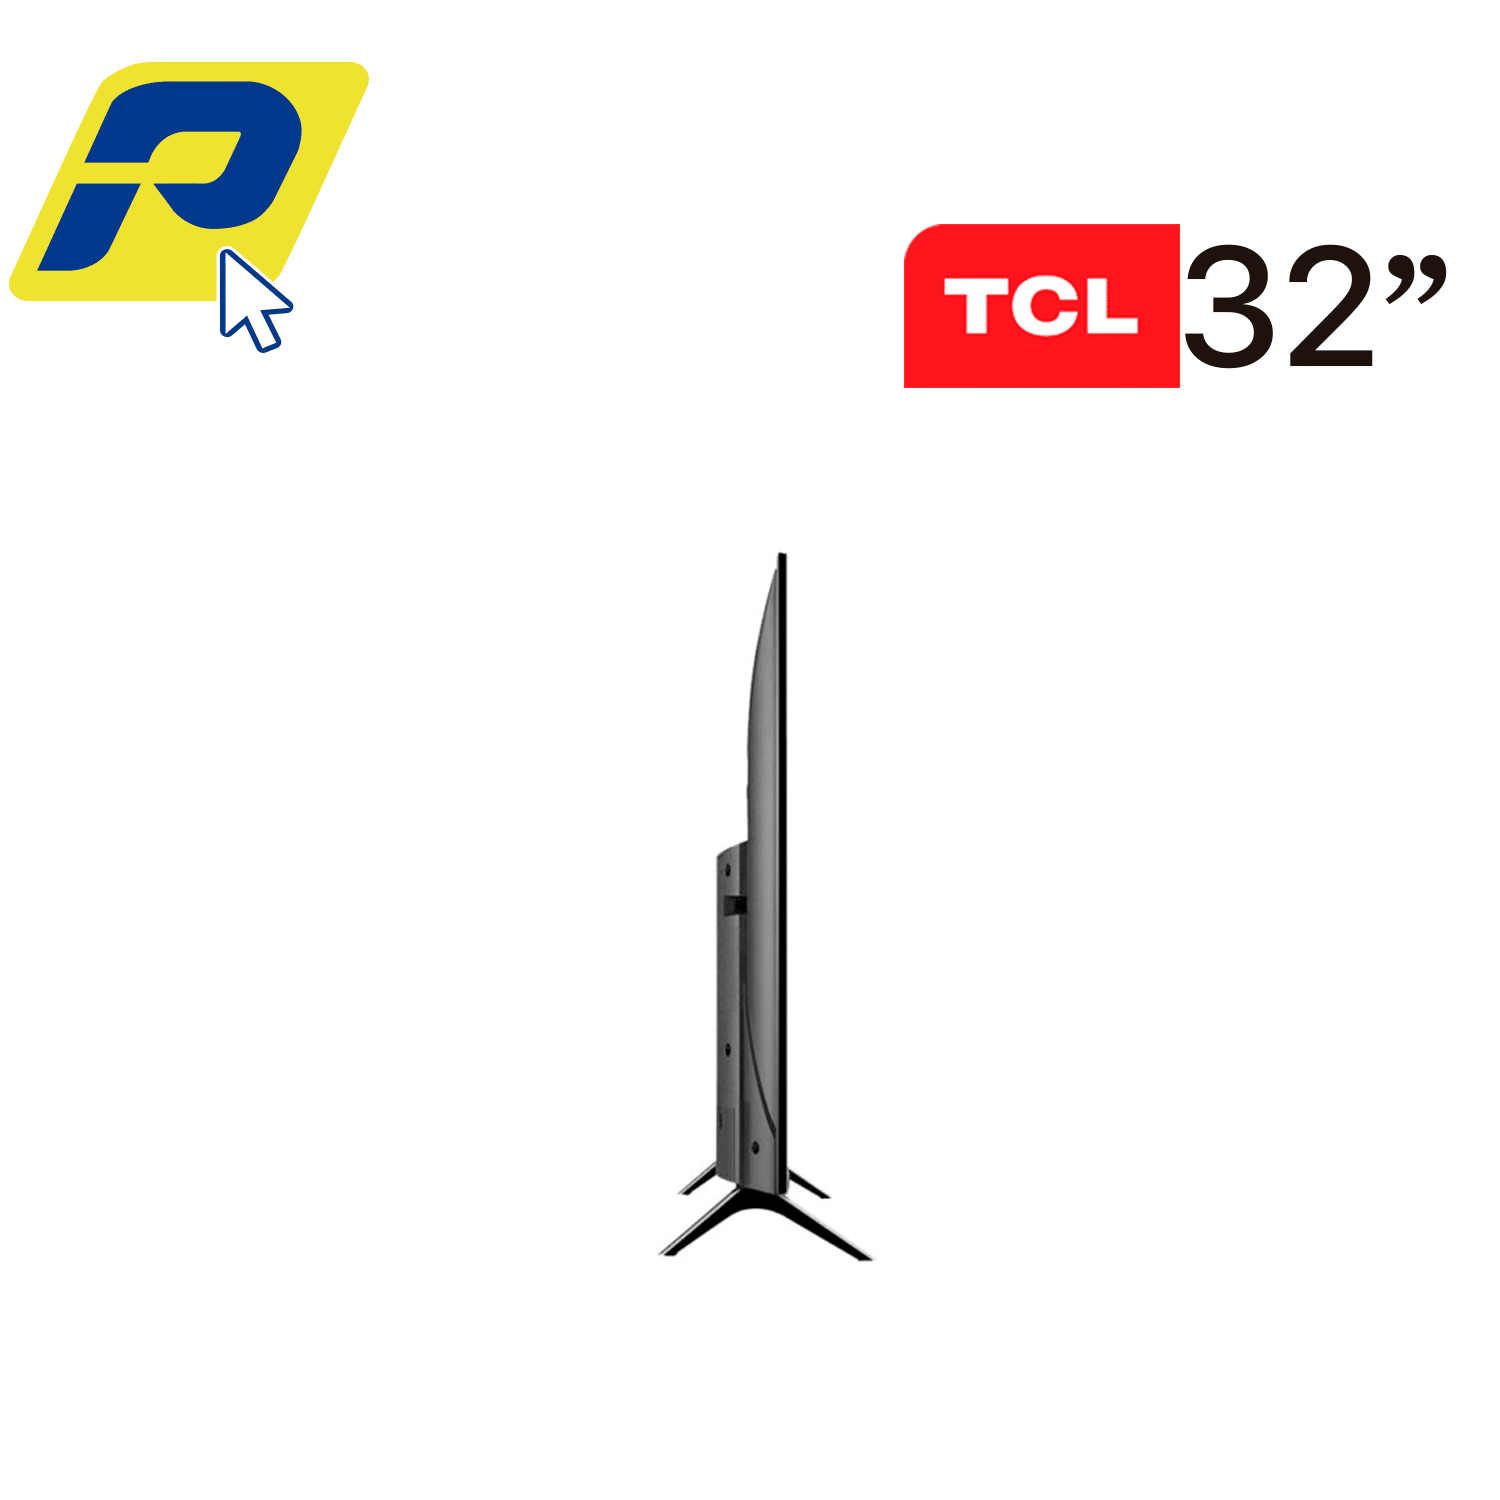 tcl 32 4